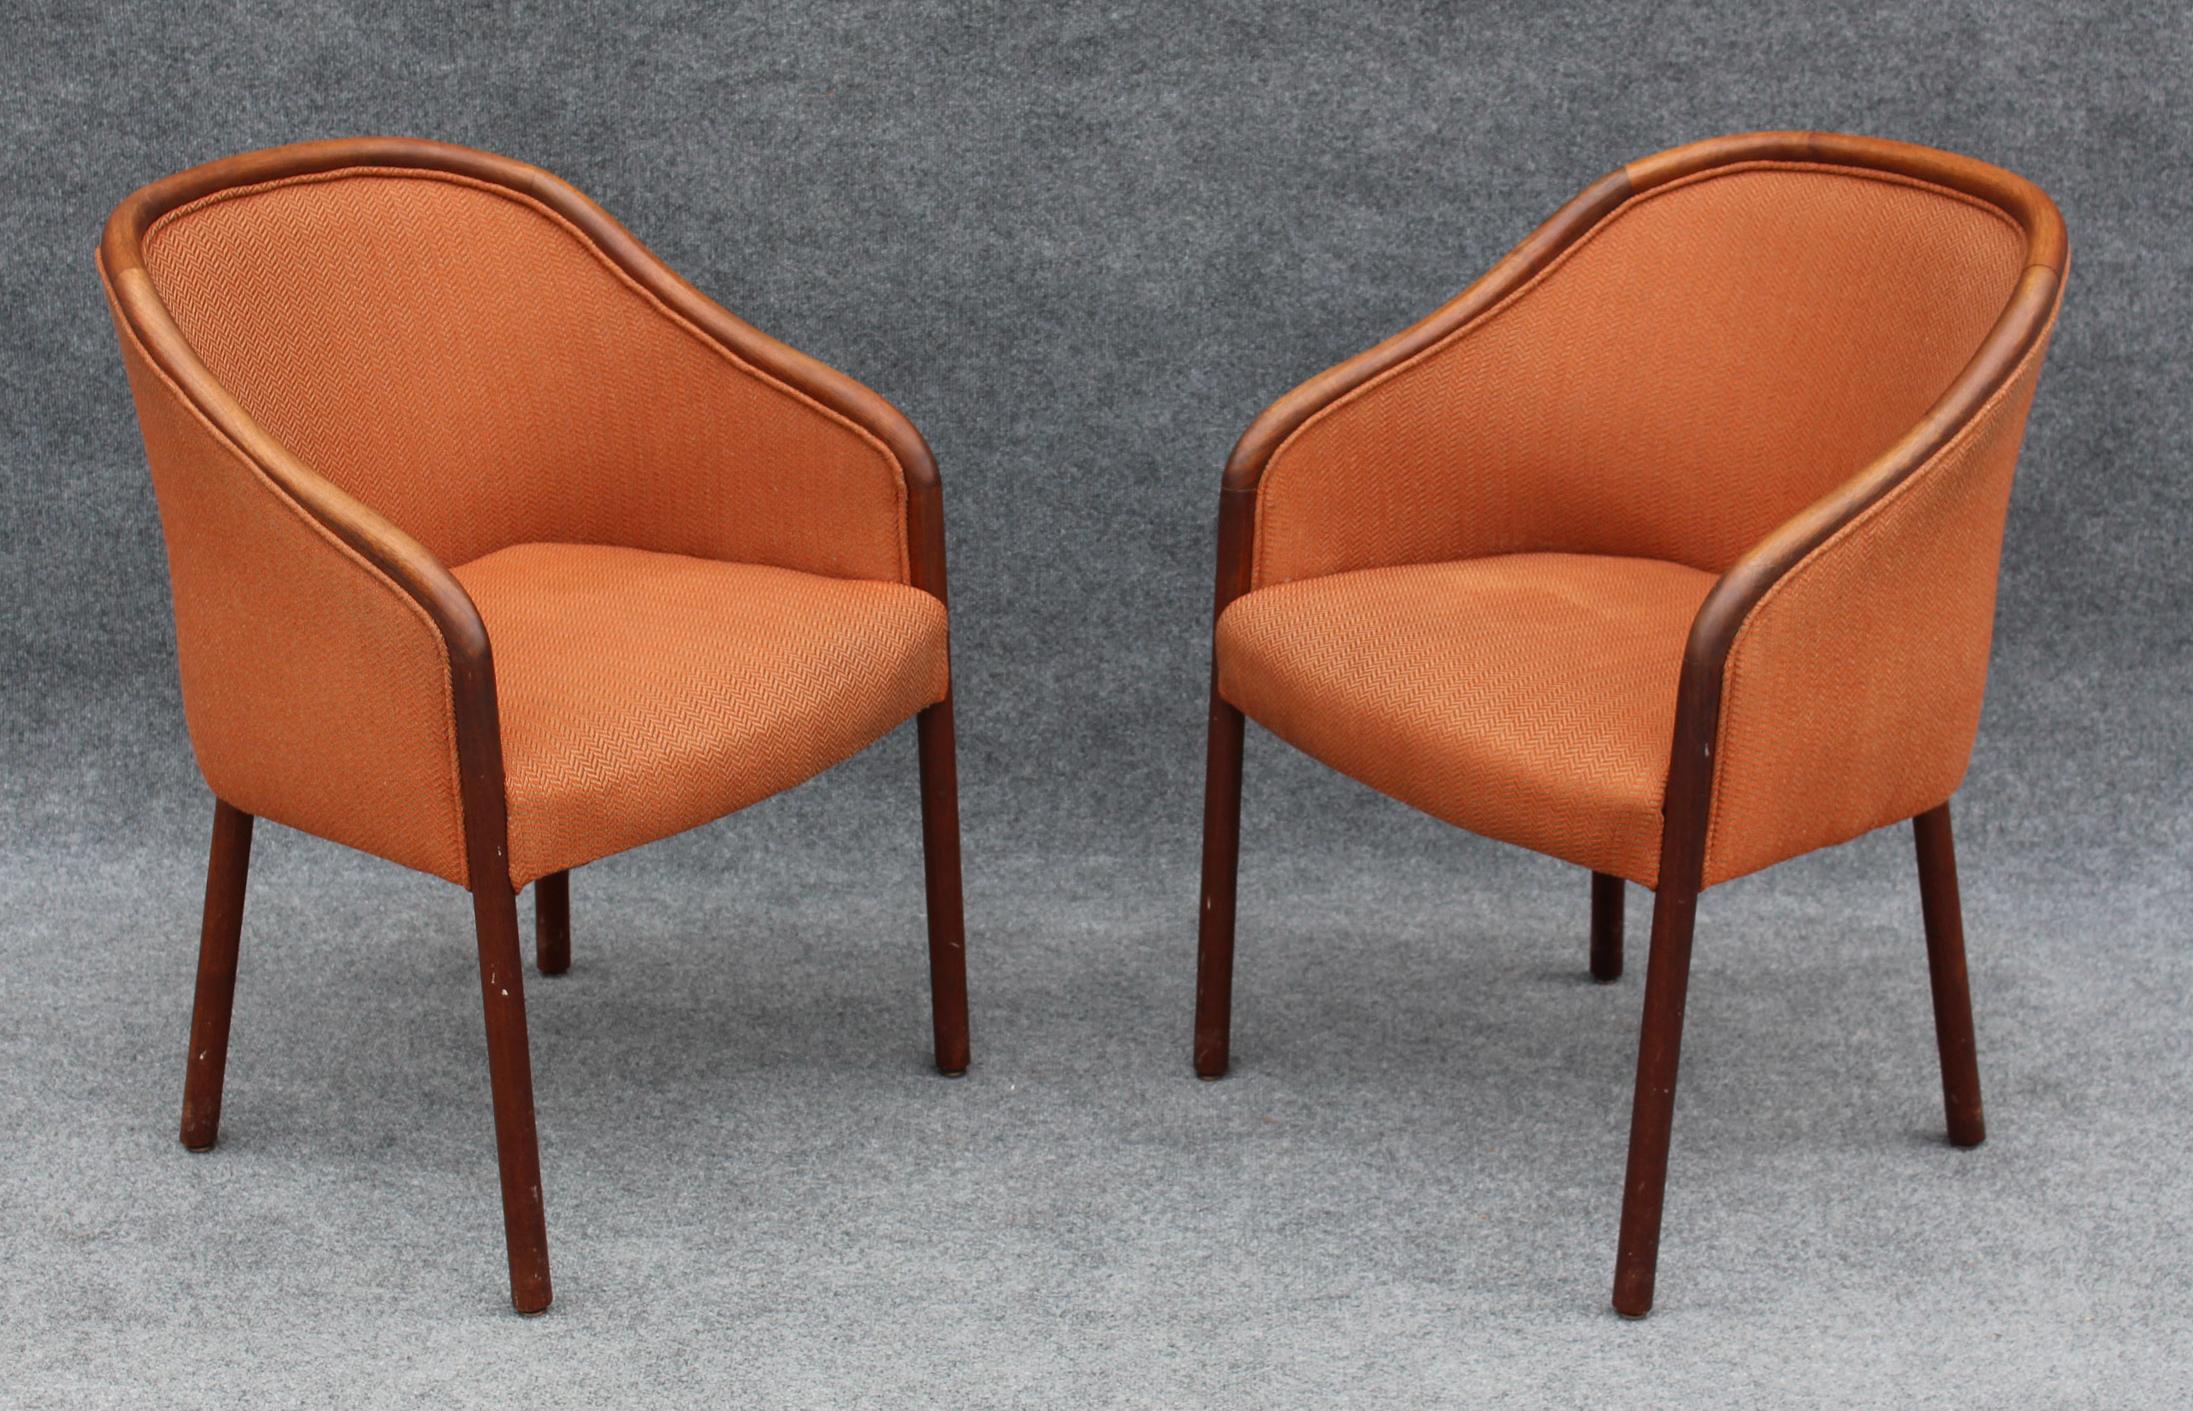 Pair of Mid-Century Modern Walnut Armchair Side Chairs After Ward Bennett In Good Condition In Philadelphia, PA